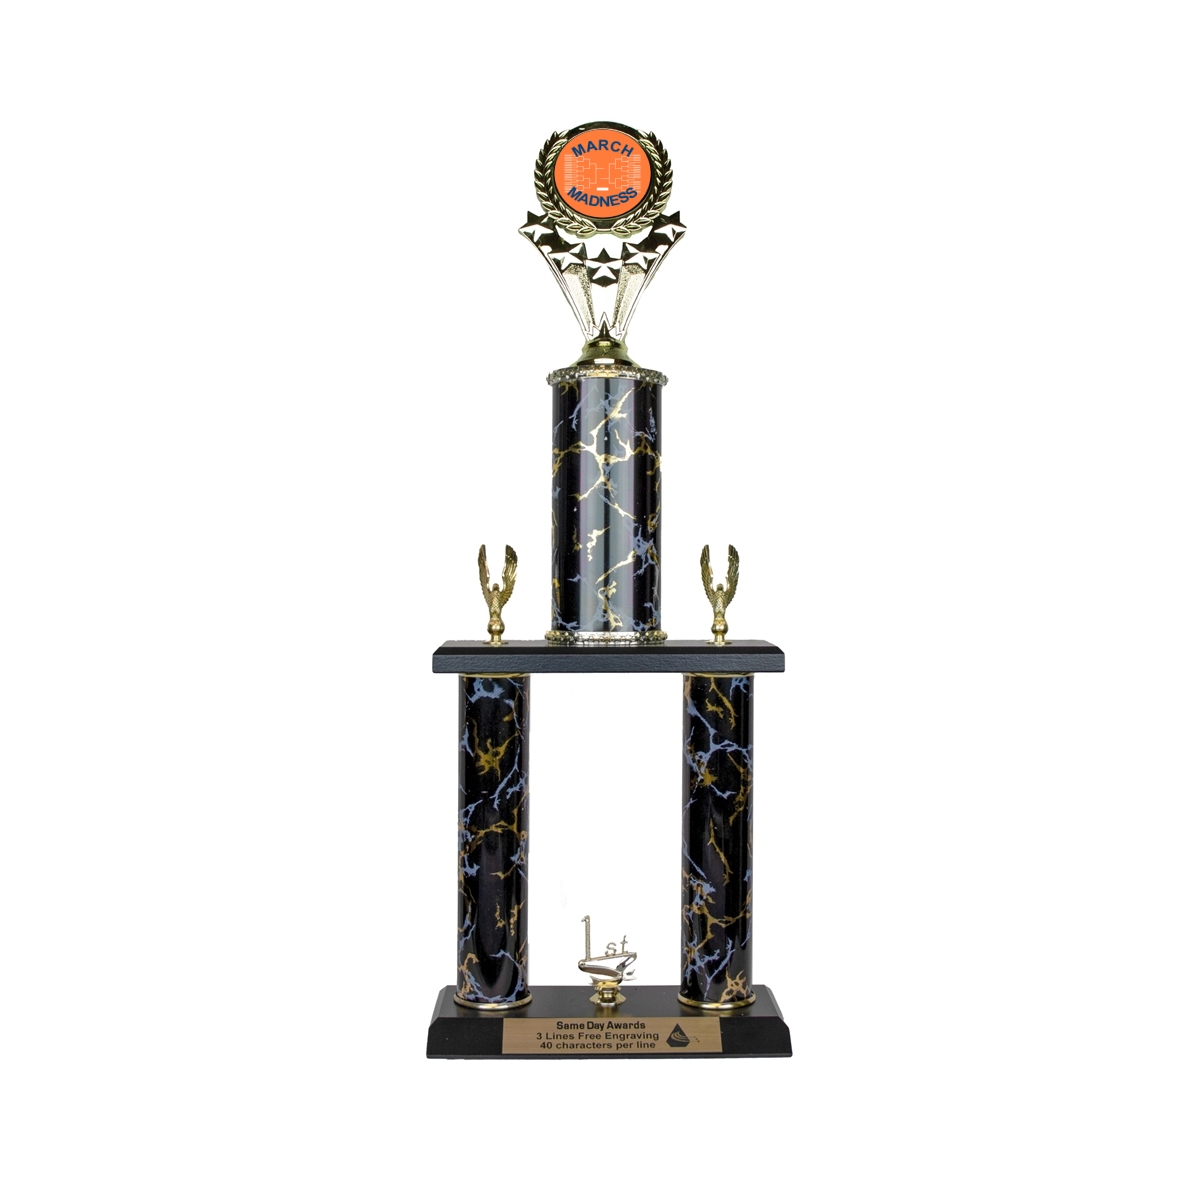 Basketball Trophies 1st,2nd,3rd Place FREE Engraving  Shipped  2-3 Day Mail 